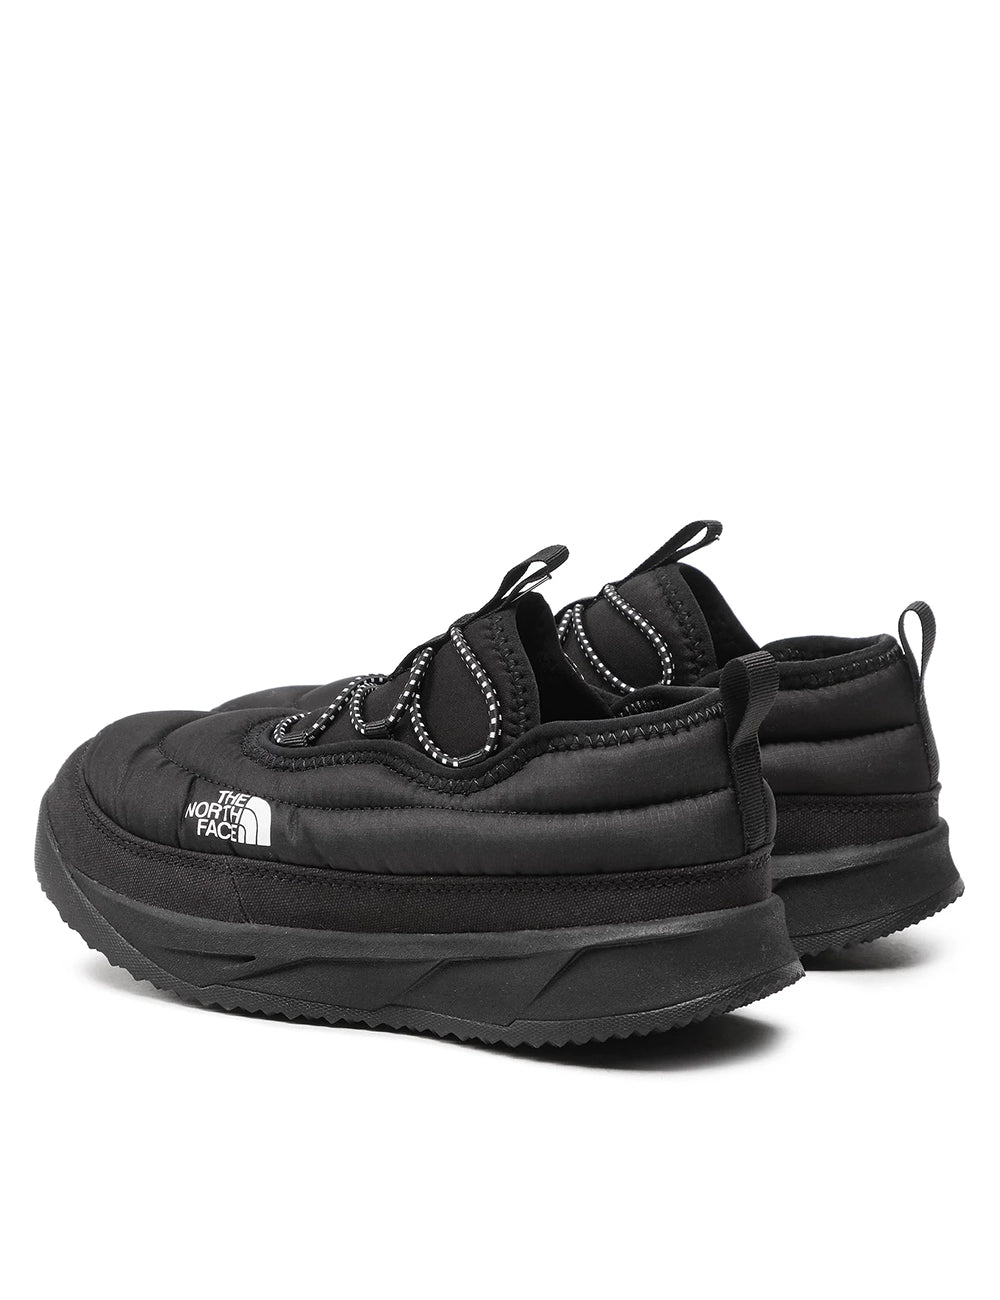 THE NORTHFACE WOMEN'S NSE LOW